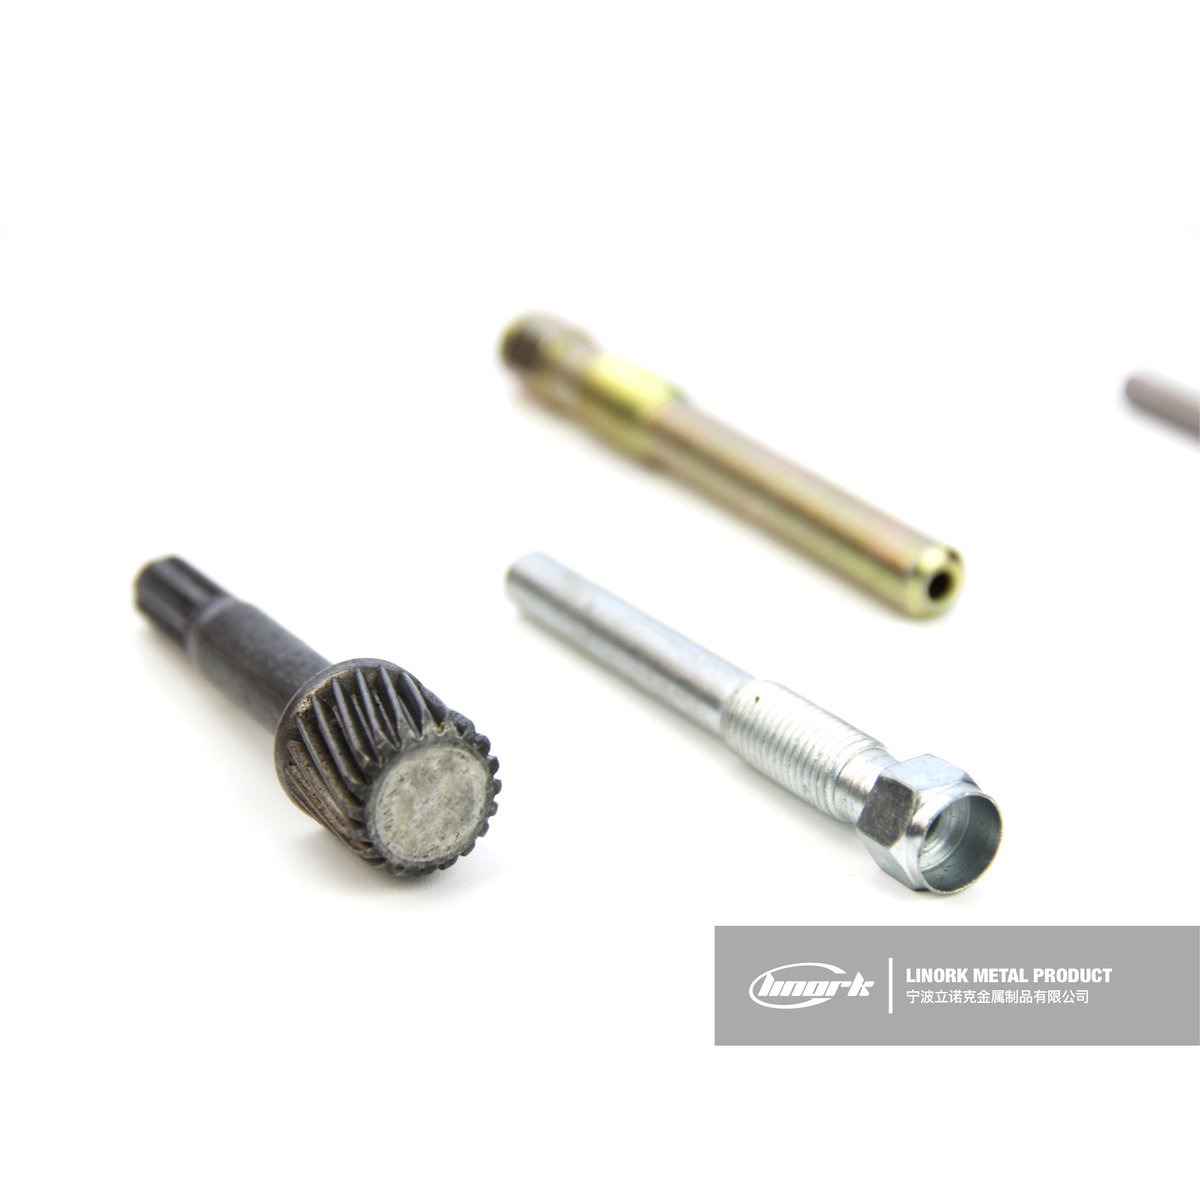 OEM Customized Screw Bolt ANSI Standard Fasteners Steel Stainless Steel Free Sample

linork.com

#linork #manufacturer #specialty #fasteners #bolt #shaft #replacement #customized #components #carbonsteel #stainlesssteel #hardware #screw #nuts #zinc #galvanized